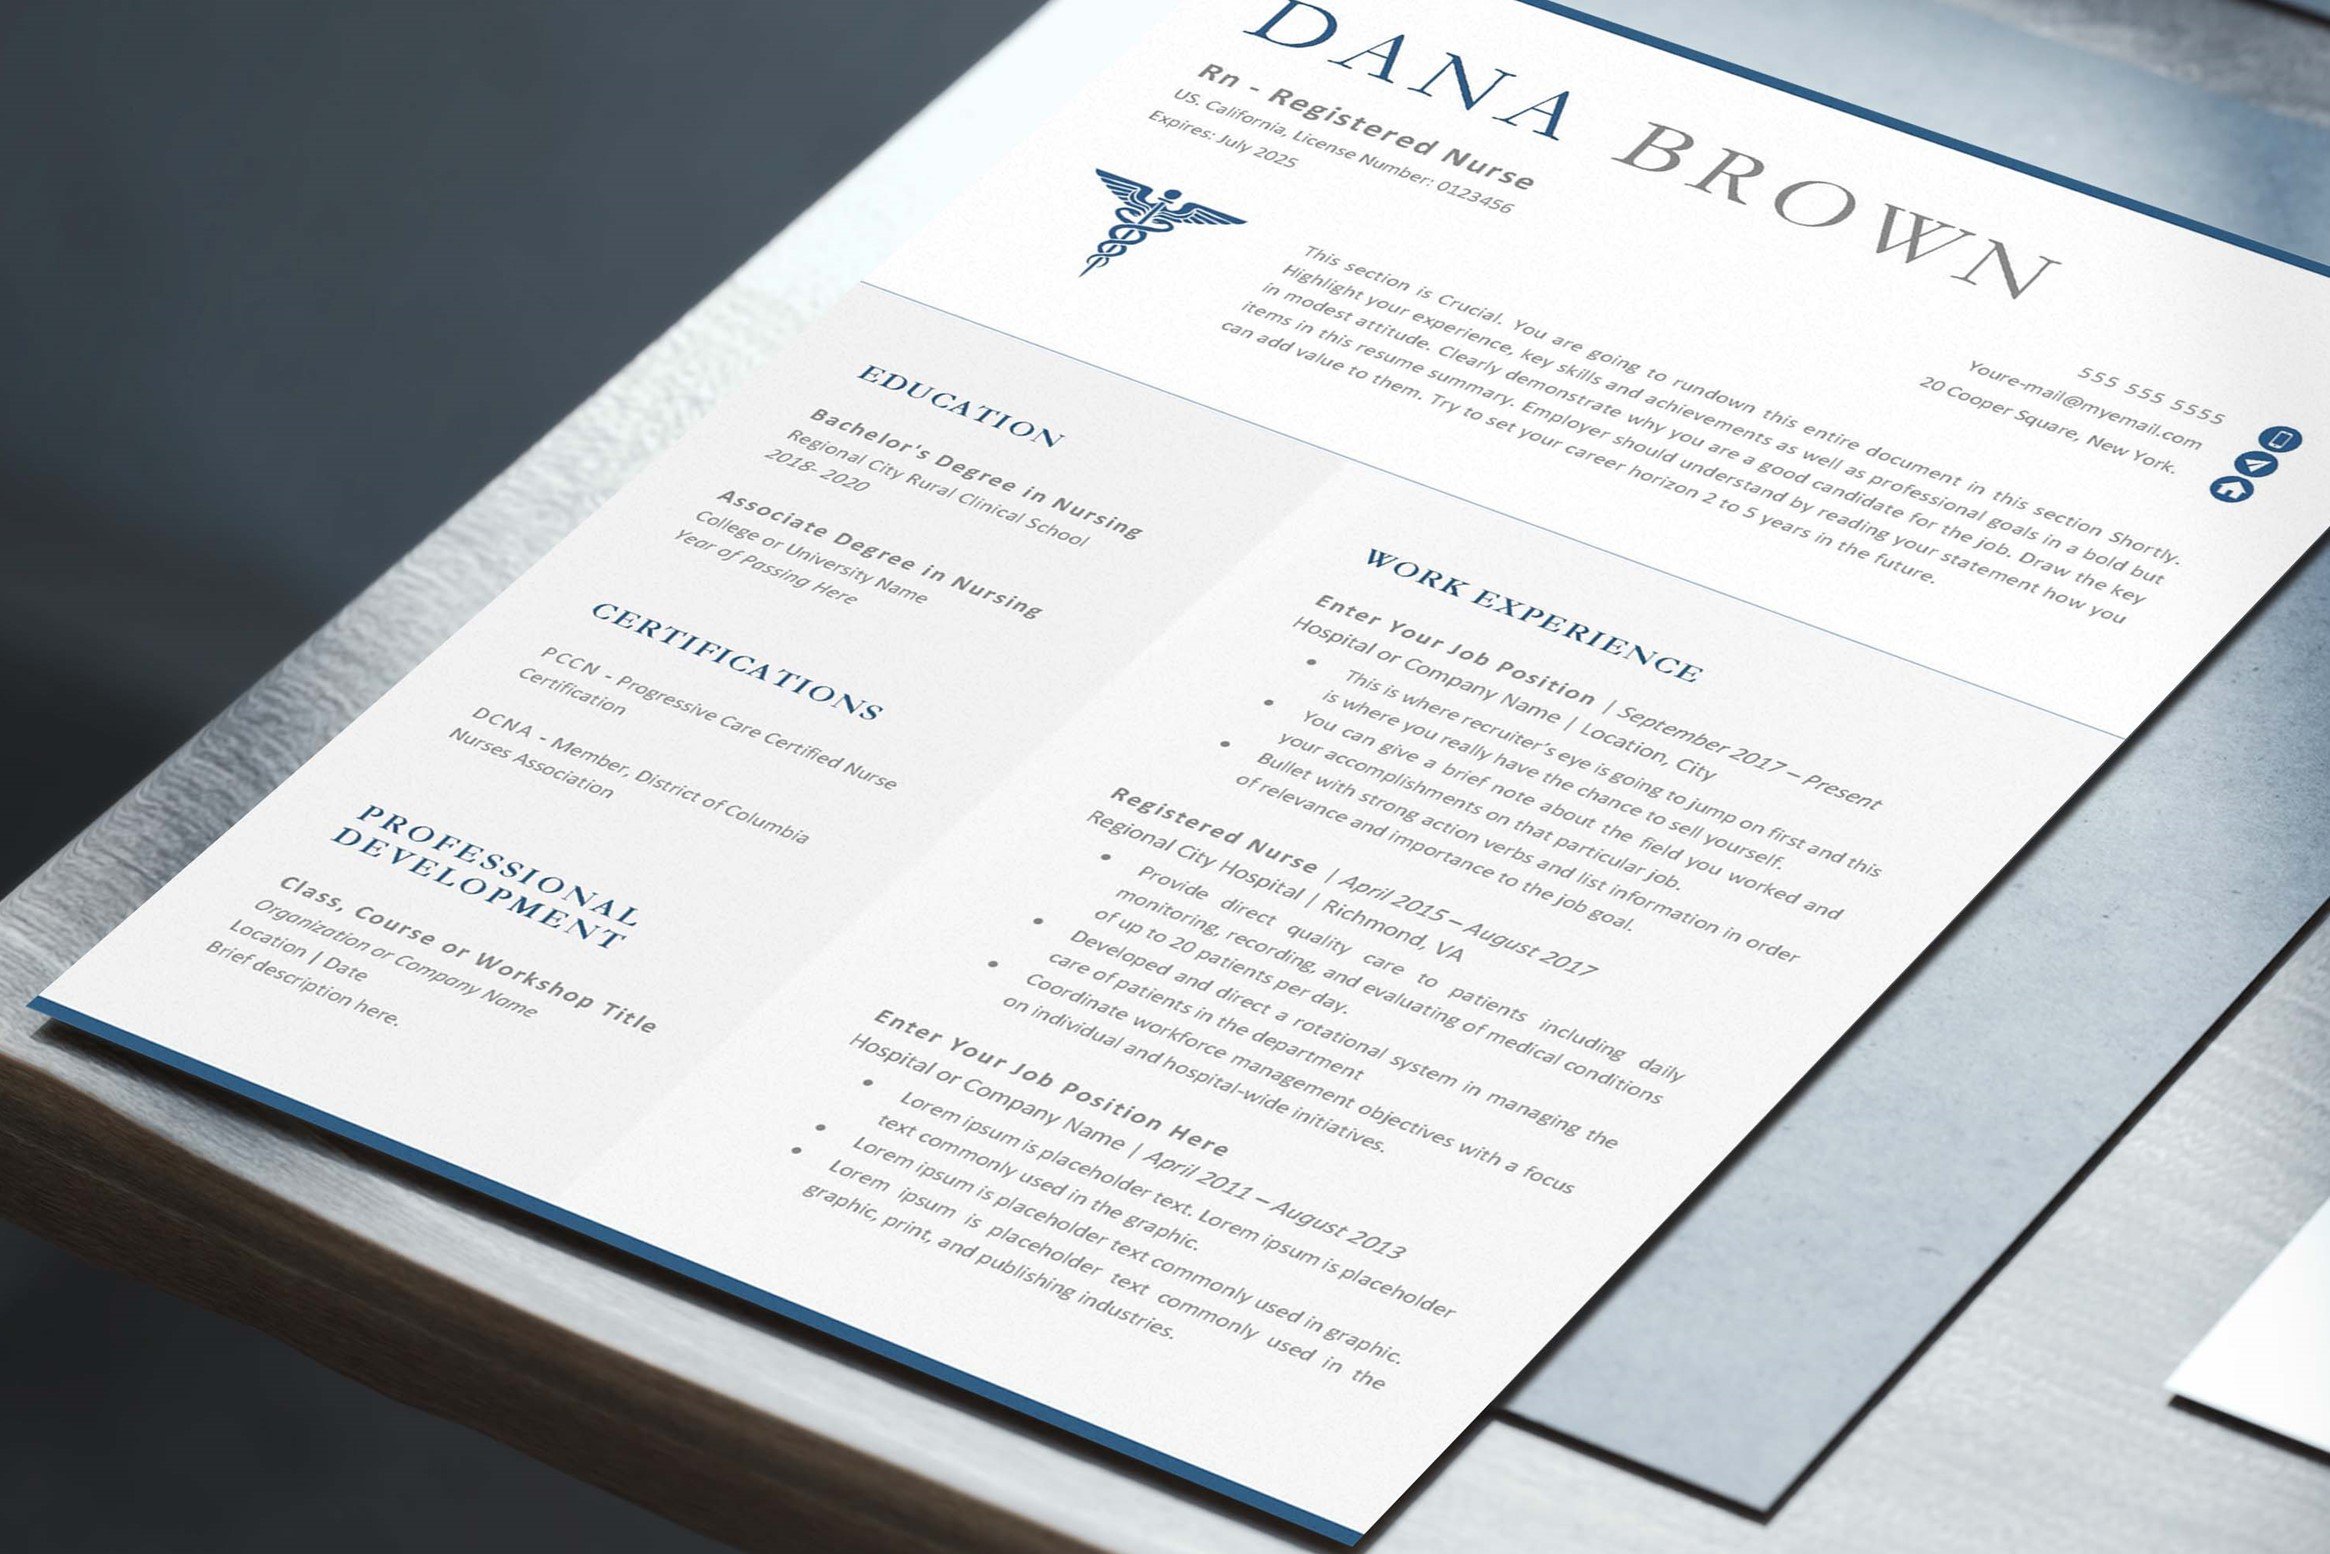 Professional resume is displayed on a table.